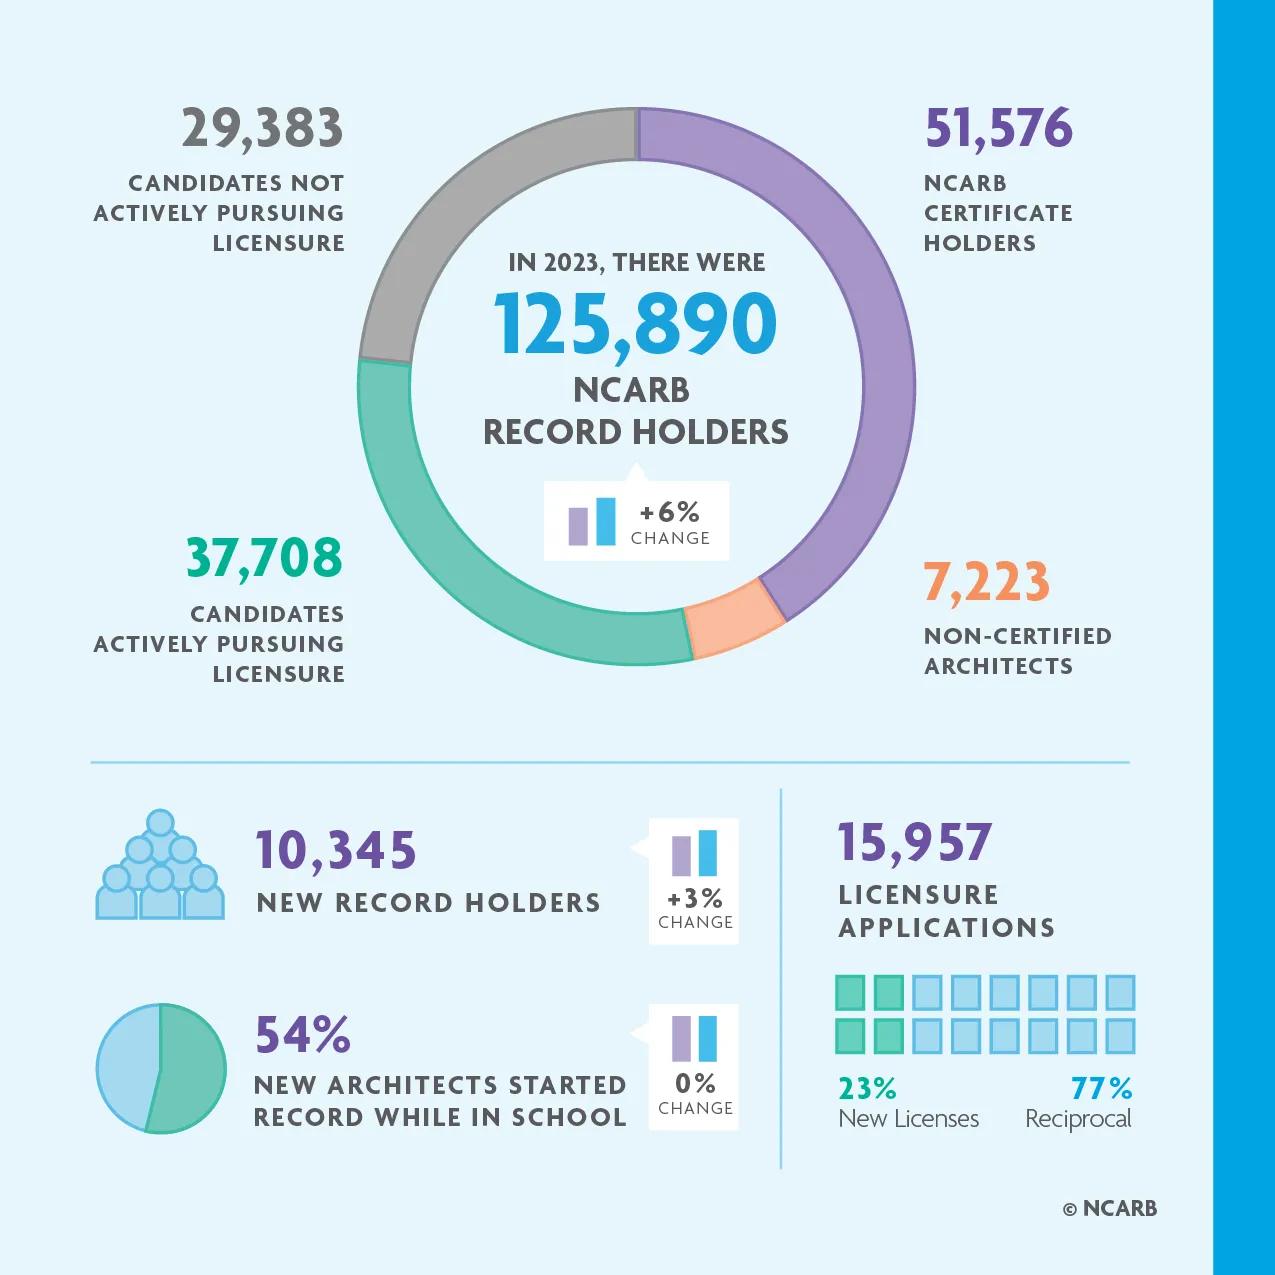 NCARB had over 125,000 Record holders in 2023, including more than 50,000 Certificate holders. For help with data accessibility, contact communications@ncarb.org.